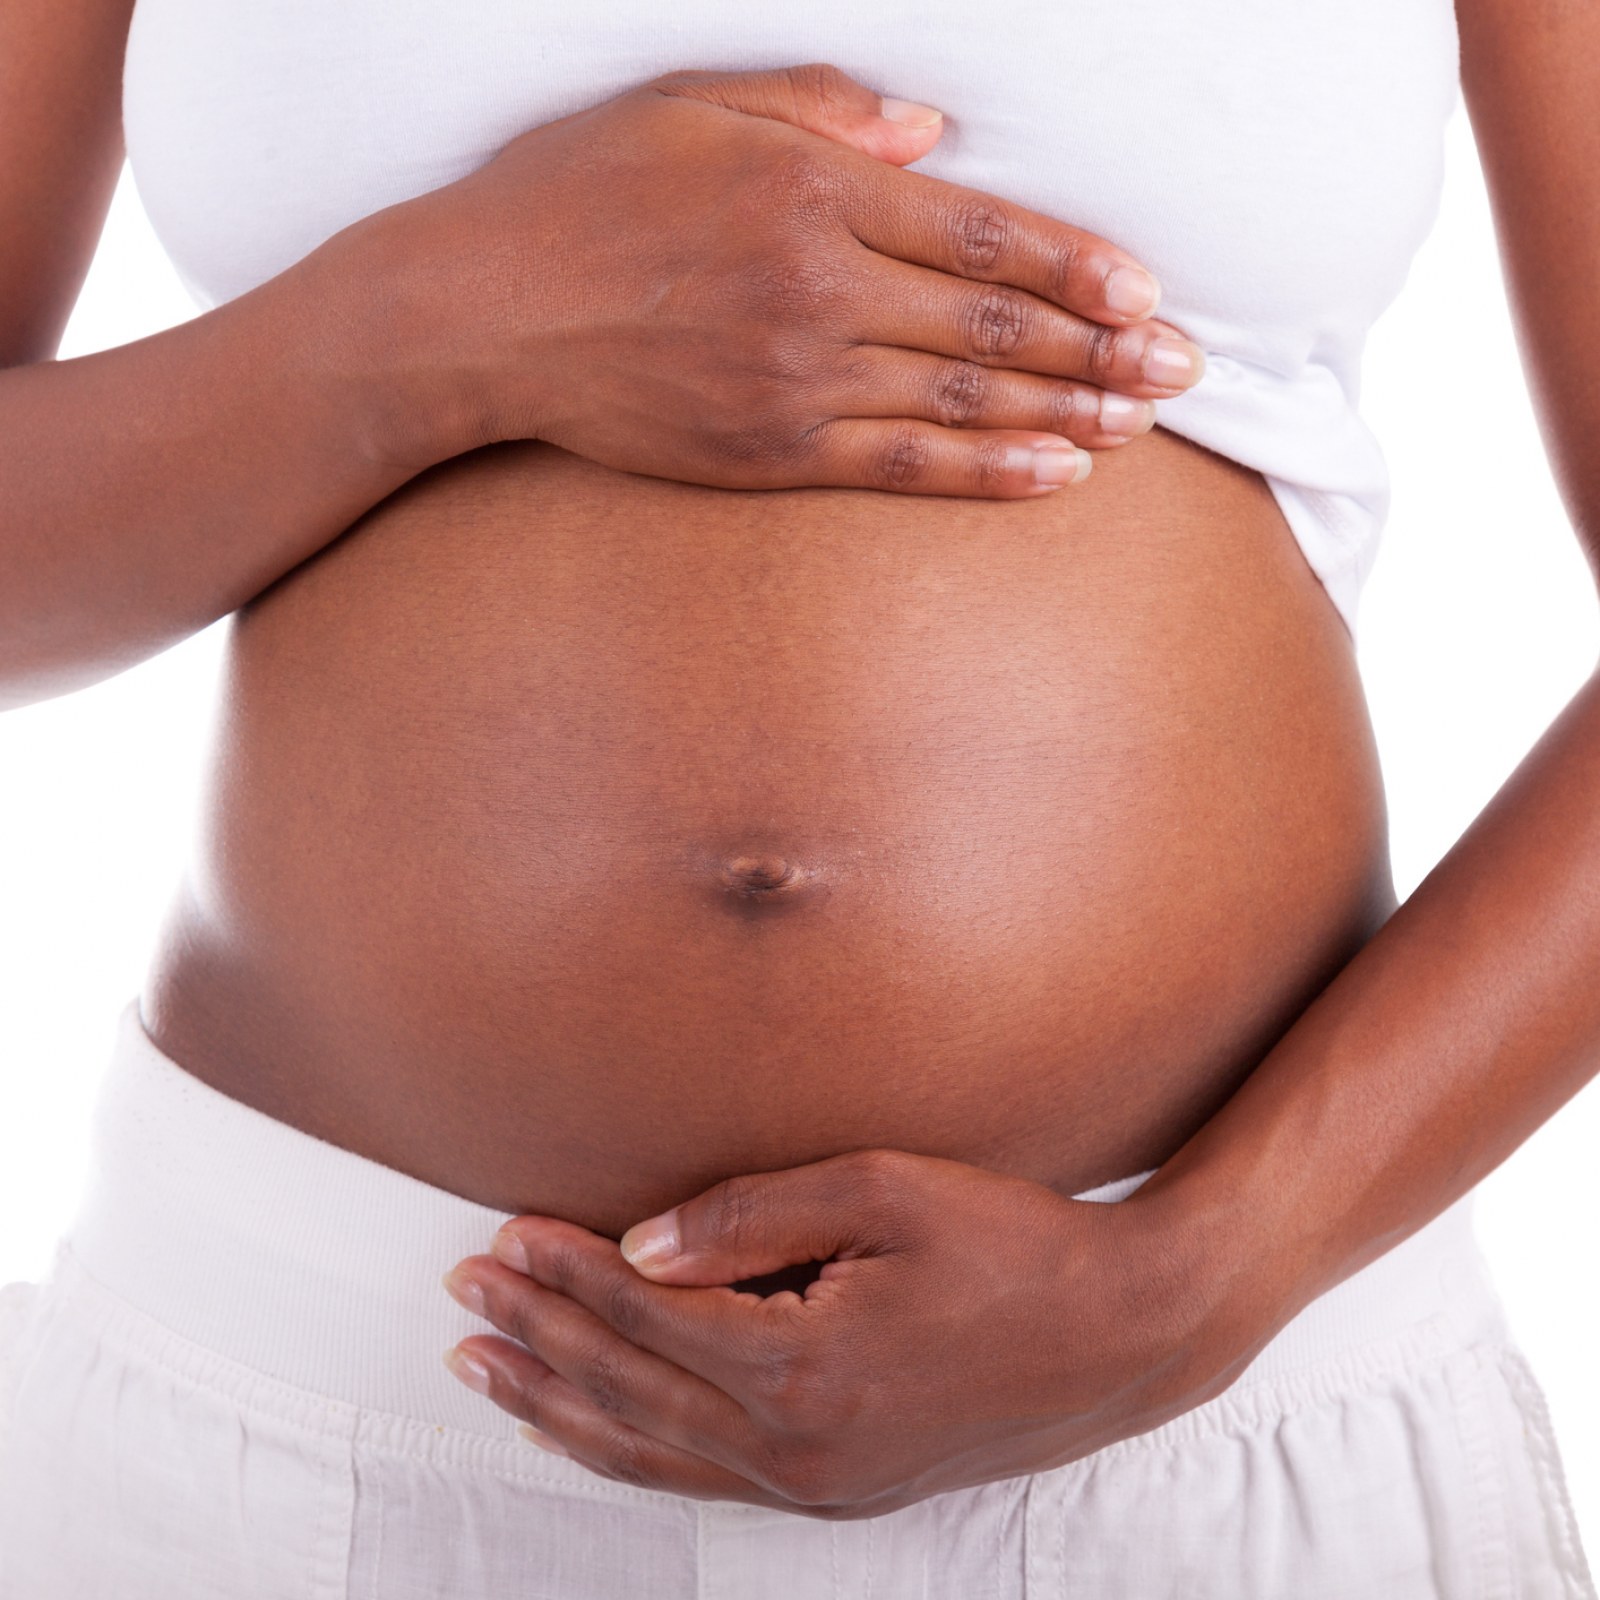 How To Get Pregnant When You Have Endometriosis